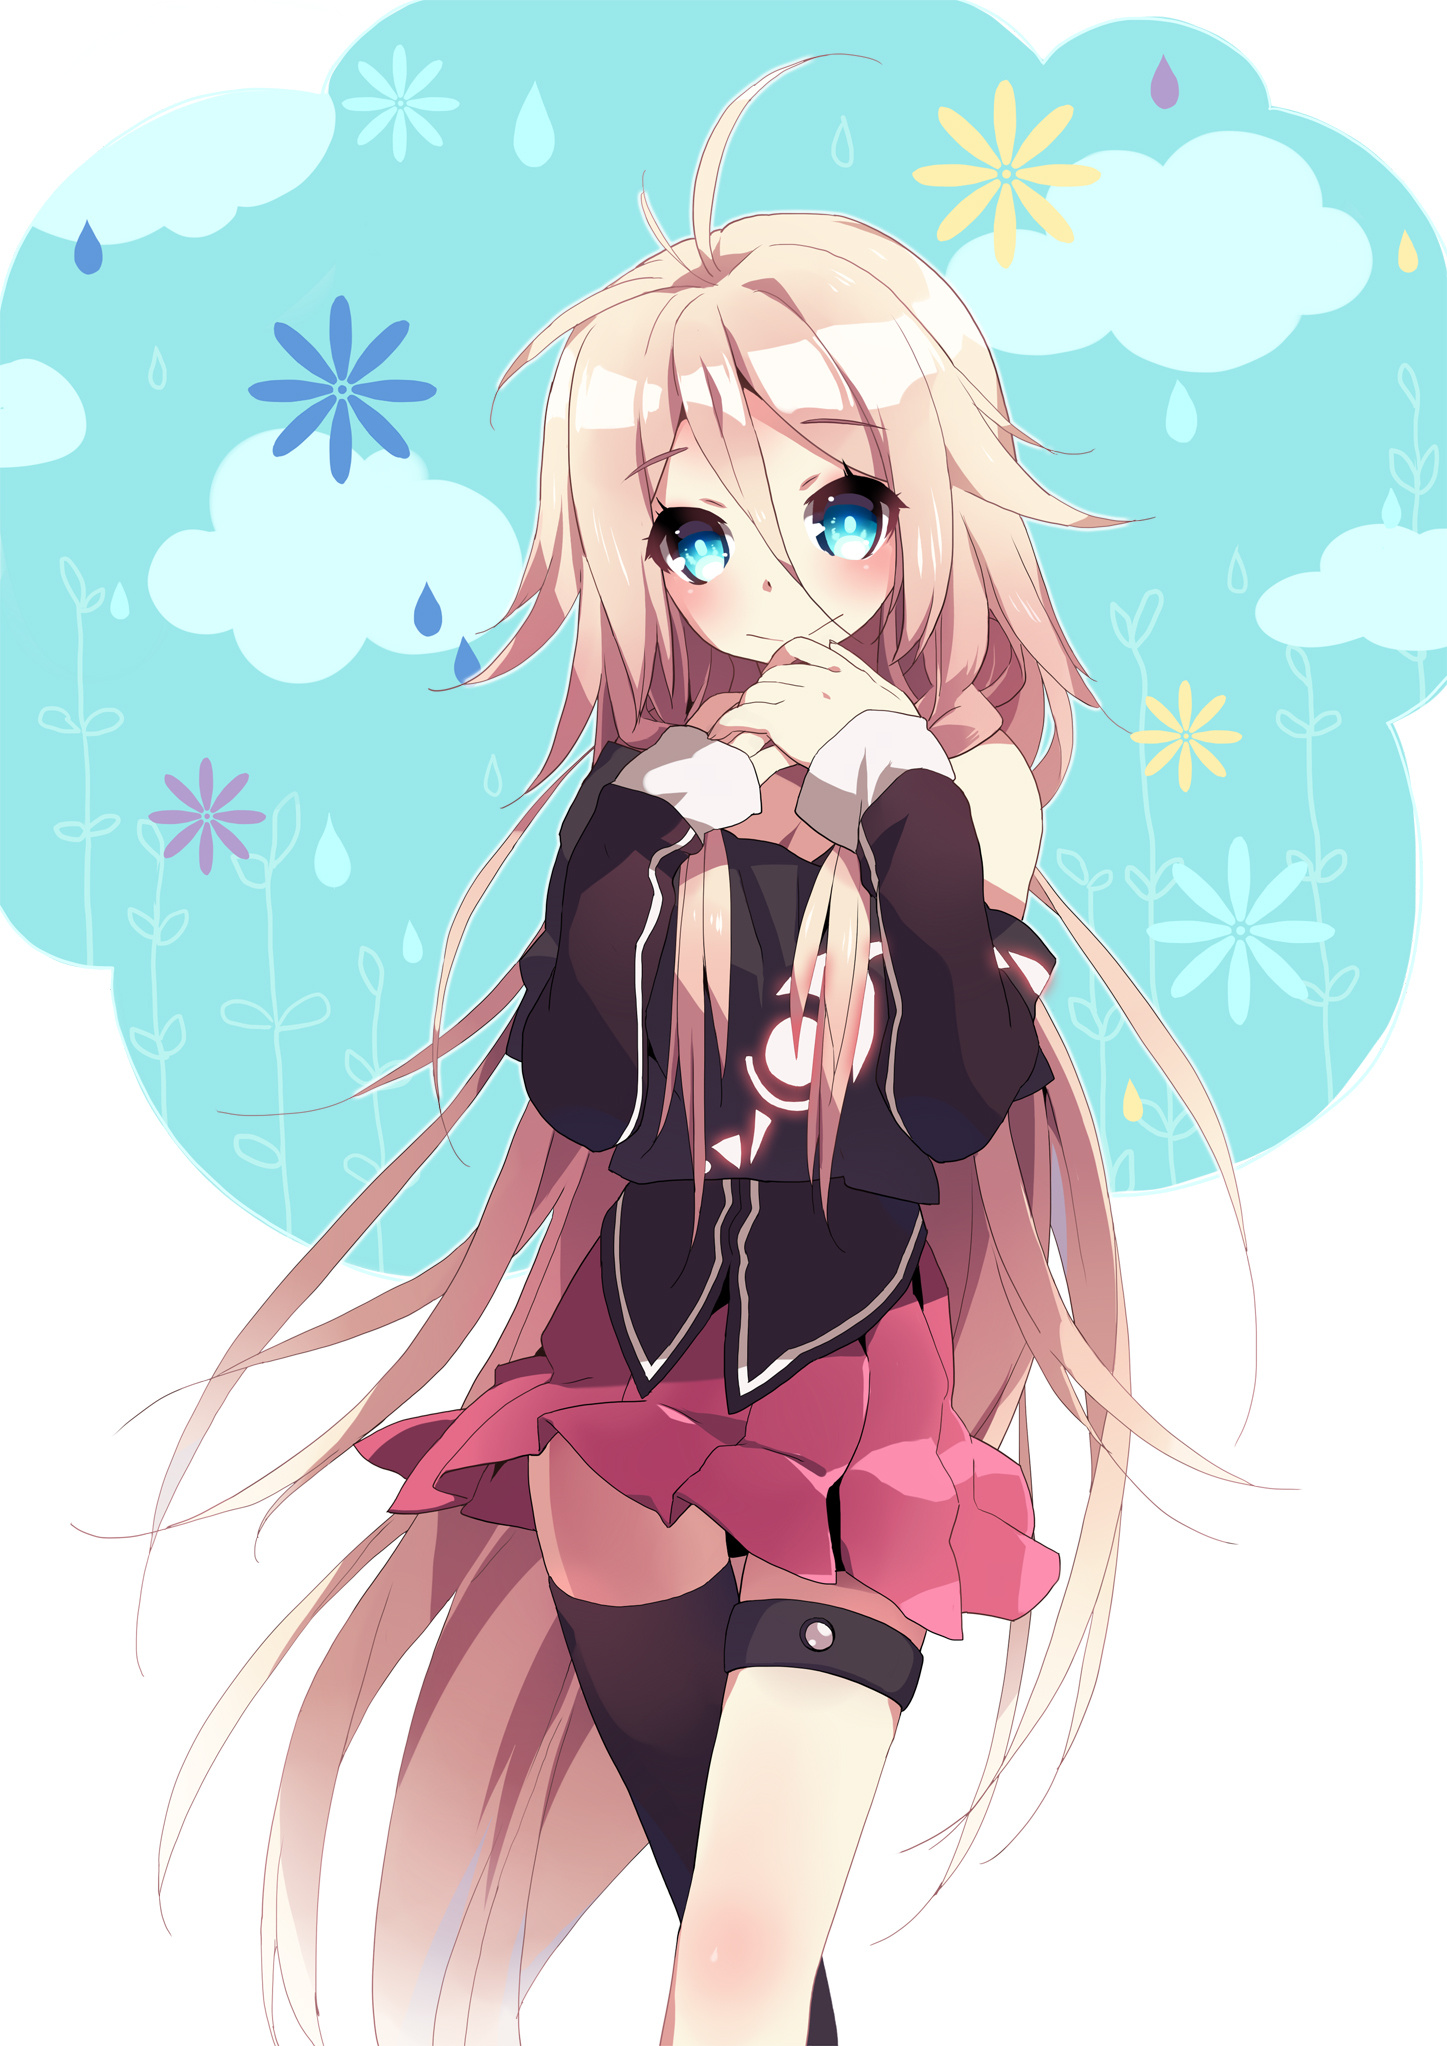 IA Vocaloid art, Artificial enemy creations, Captivating illustrations, Mesmerizing songs, 1450x2050 HD Handy